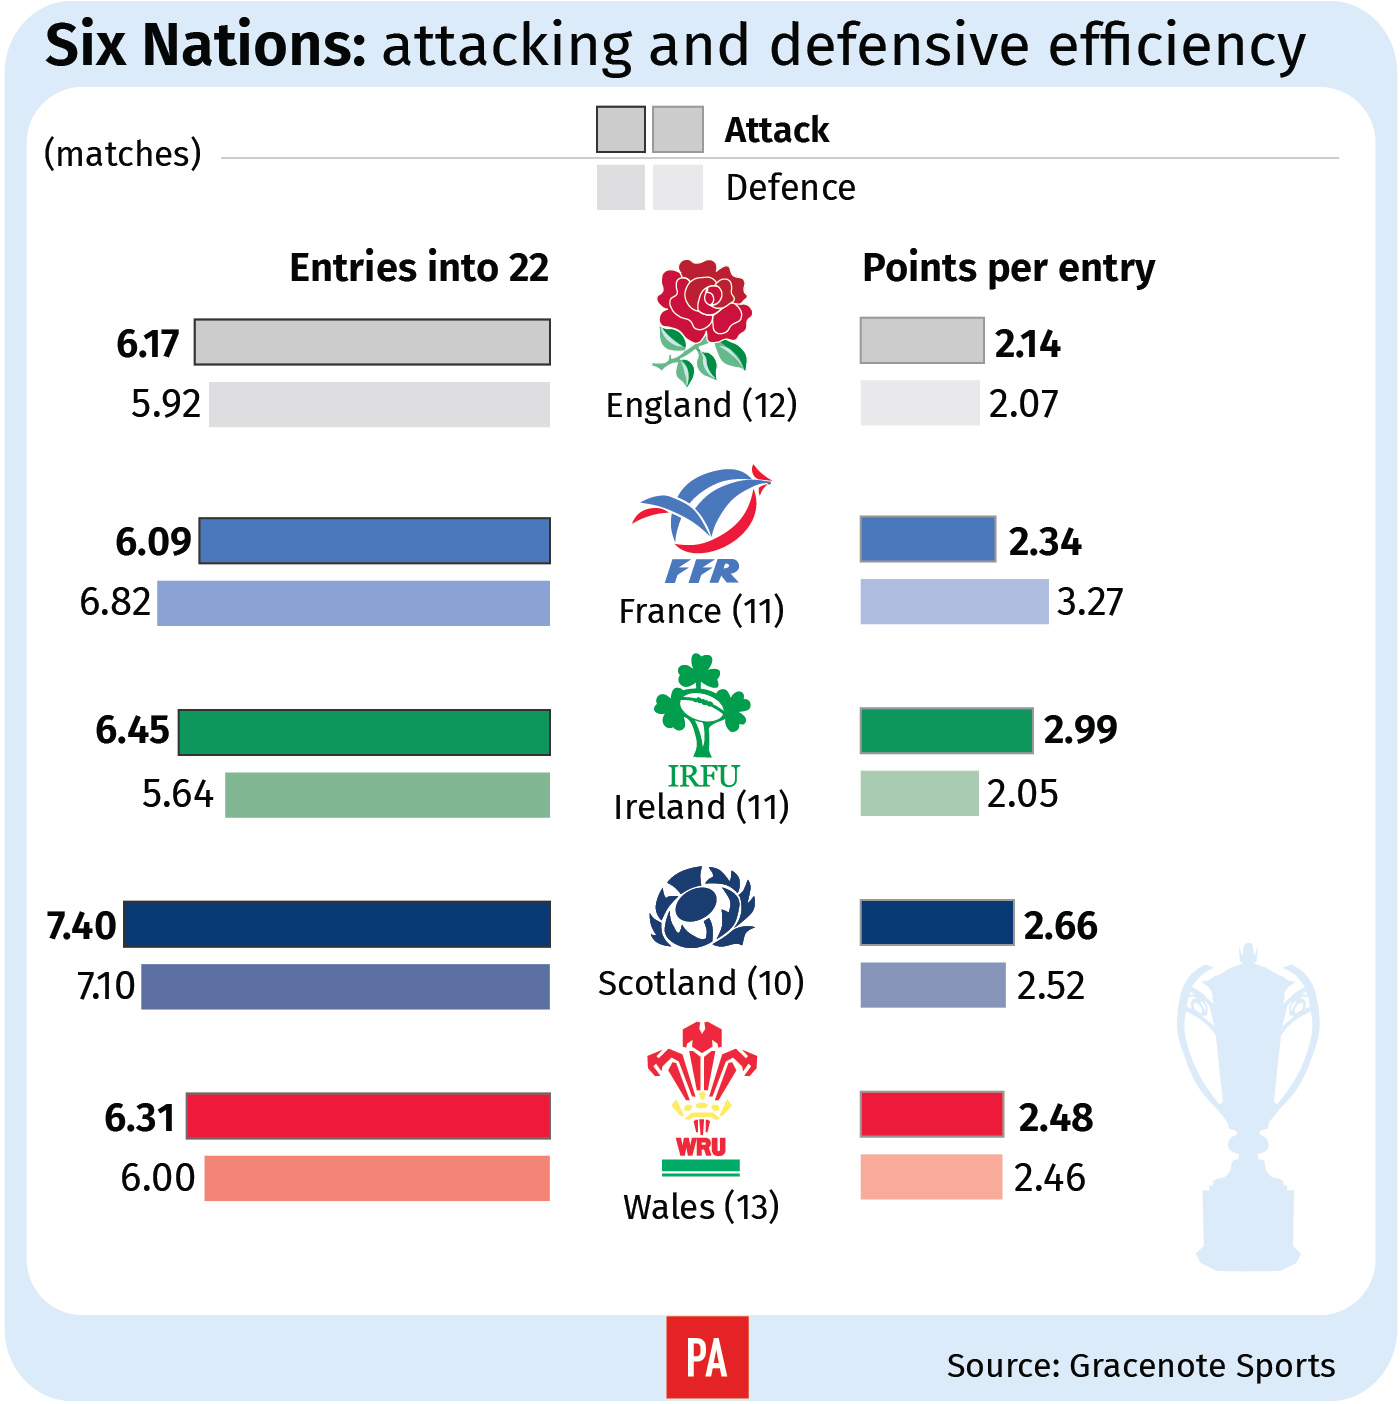 Six Nations: Attacking and defensive efficiency